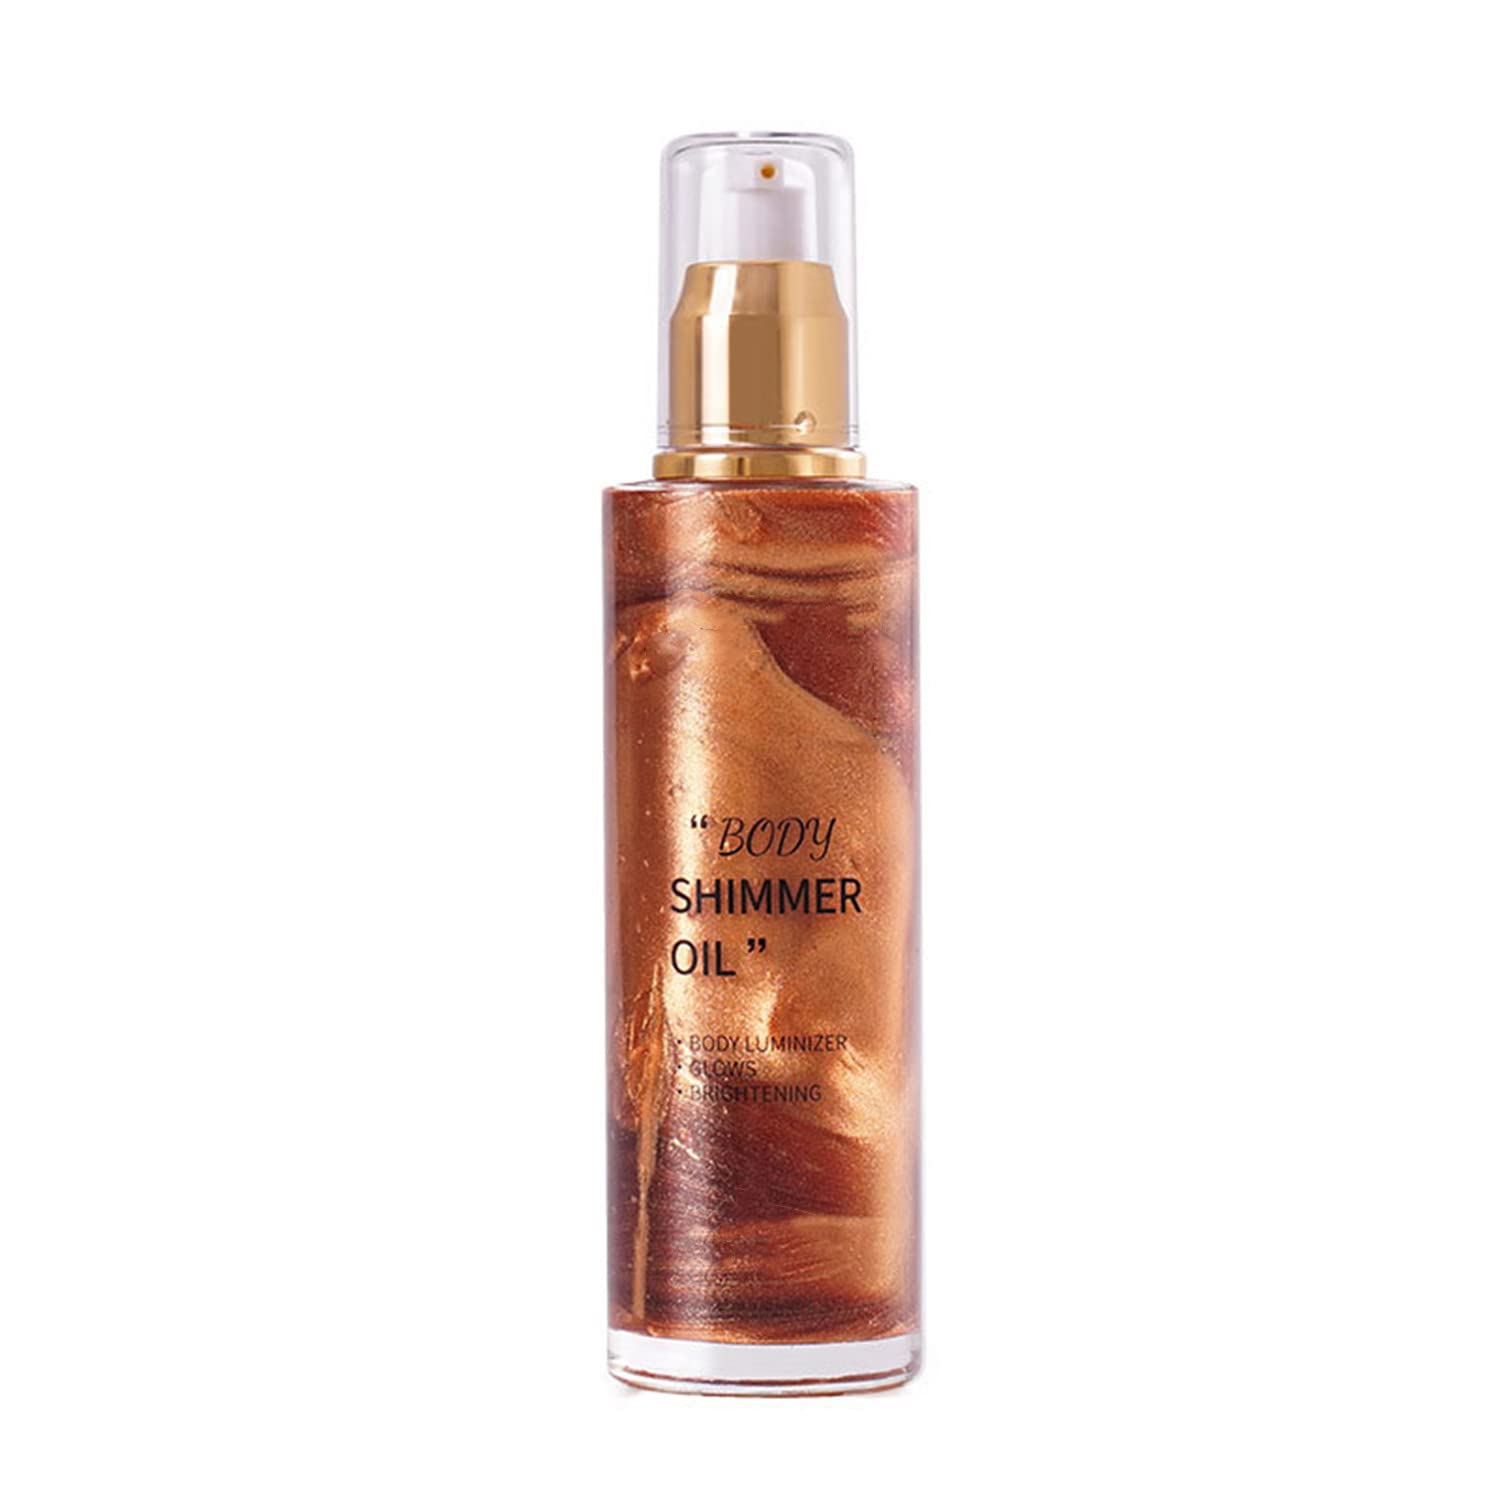 MAEPEOR Shimmer Body Oil 5 Colors Moisturizing Light Shimmer Glow  Illuminator Smooth and Non-sticky Summer Body Luminizer (1.05 Fl Oz, M03  Bronze Gold) 1.05 Fl Oz (Pack of 1) 03 Bronze Gold